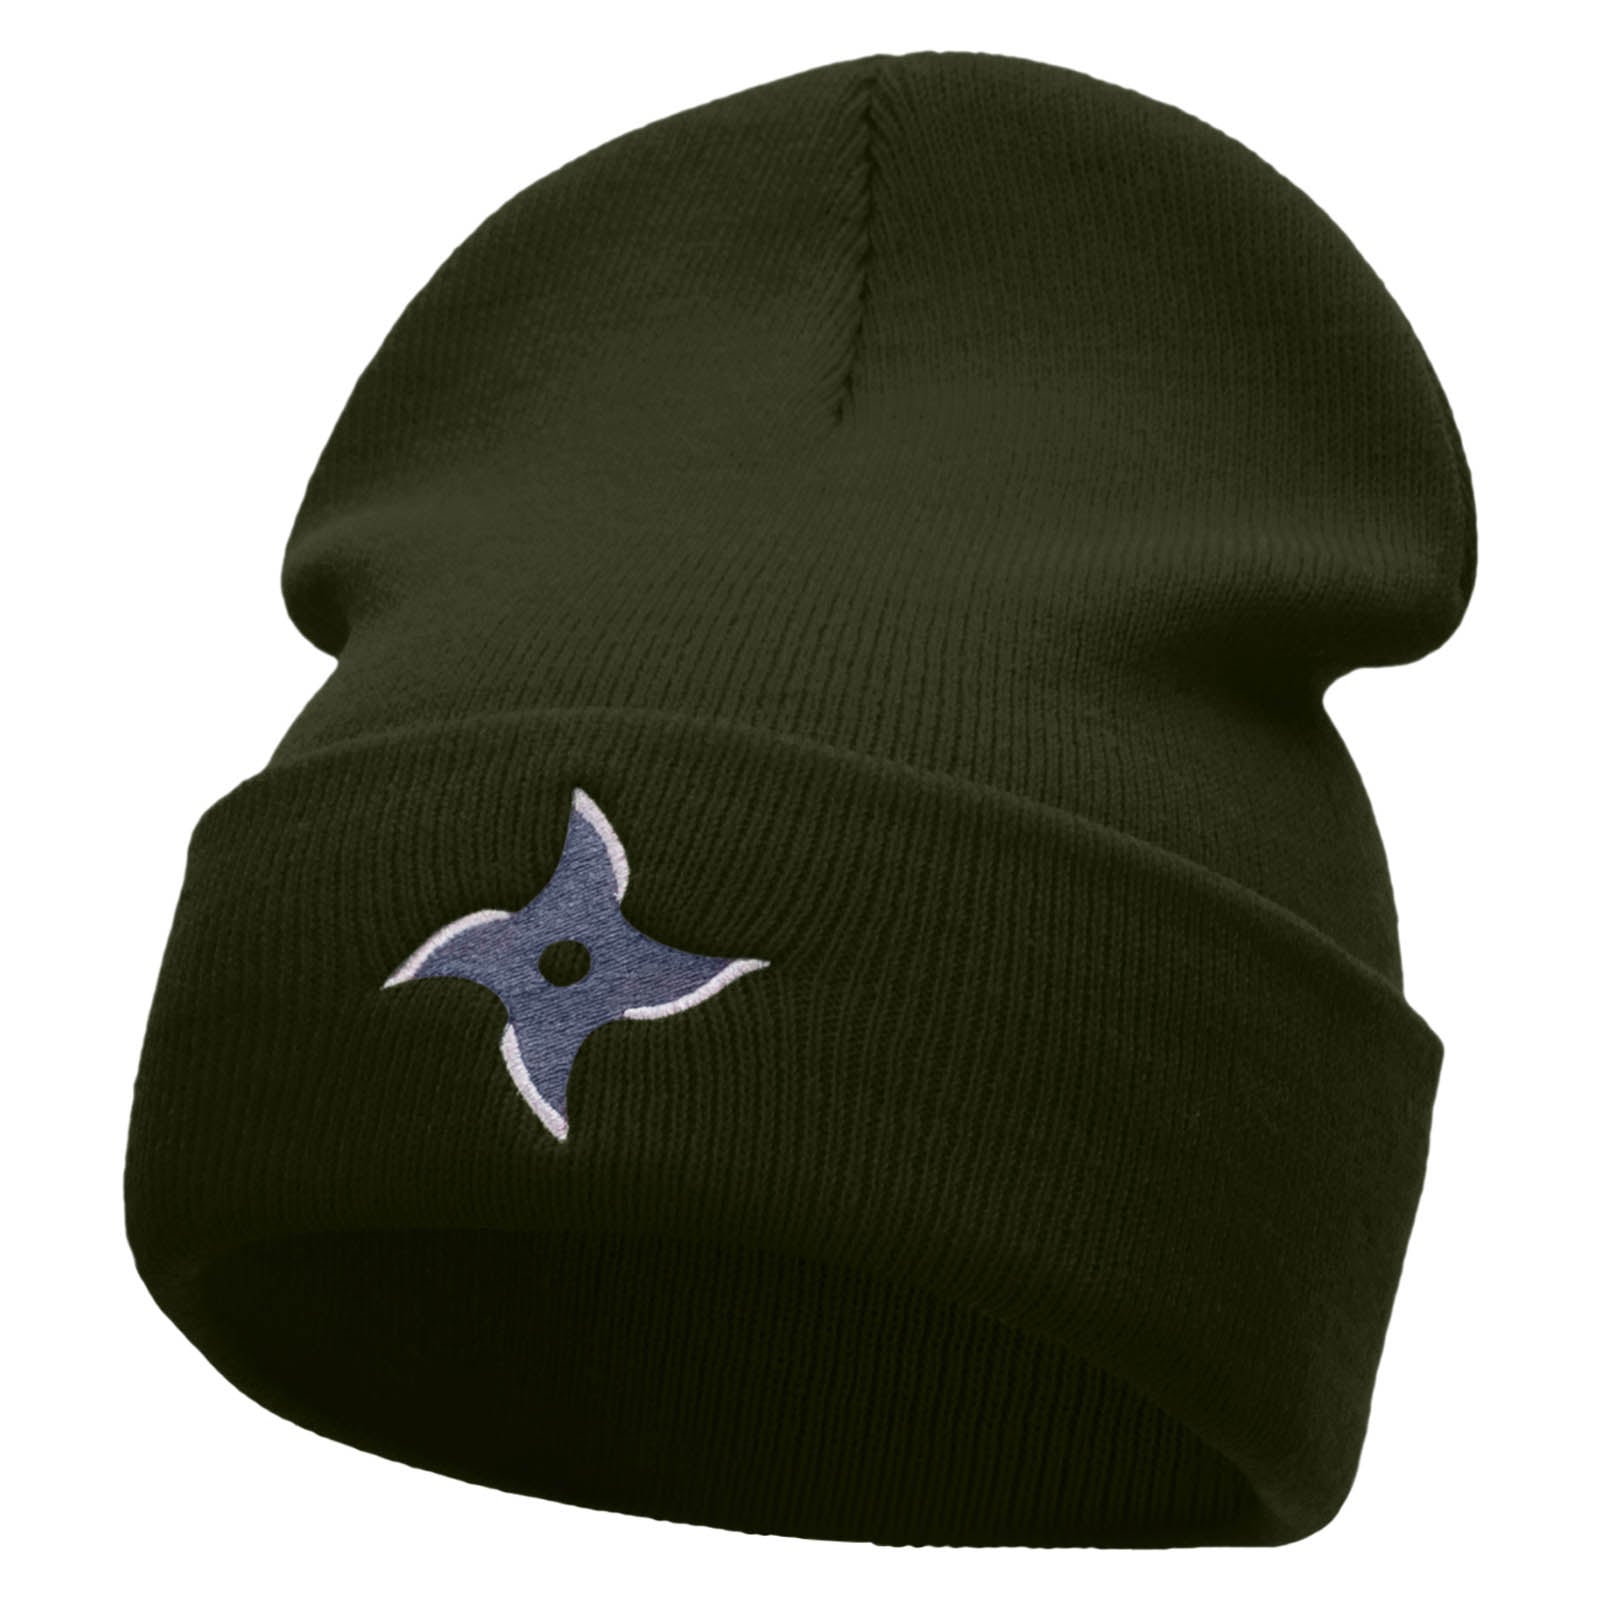 Ninja Star Embroidered 12 Inch Long Knitted Beanie - Olive OSFM